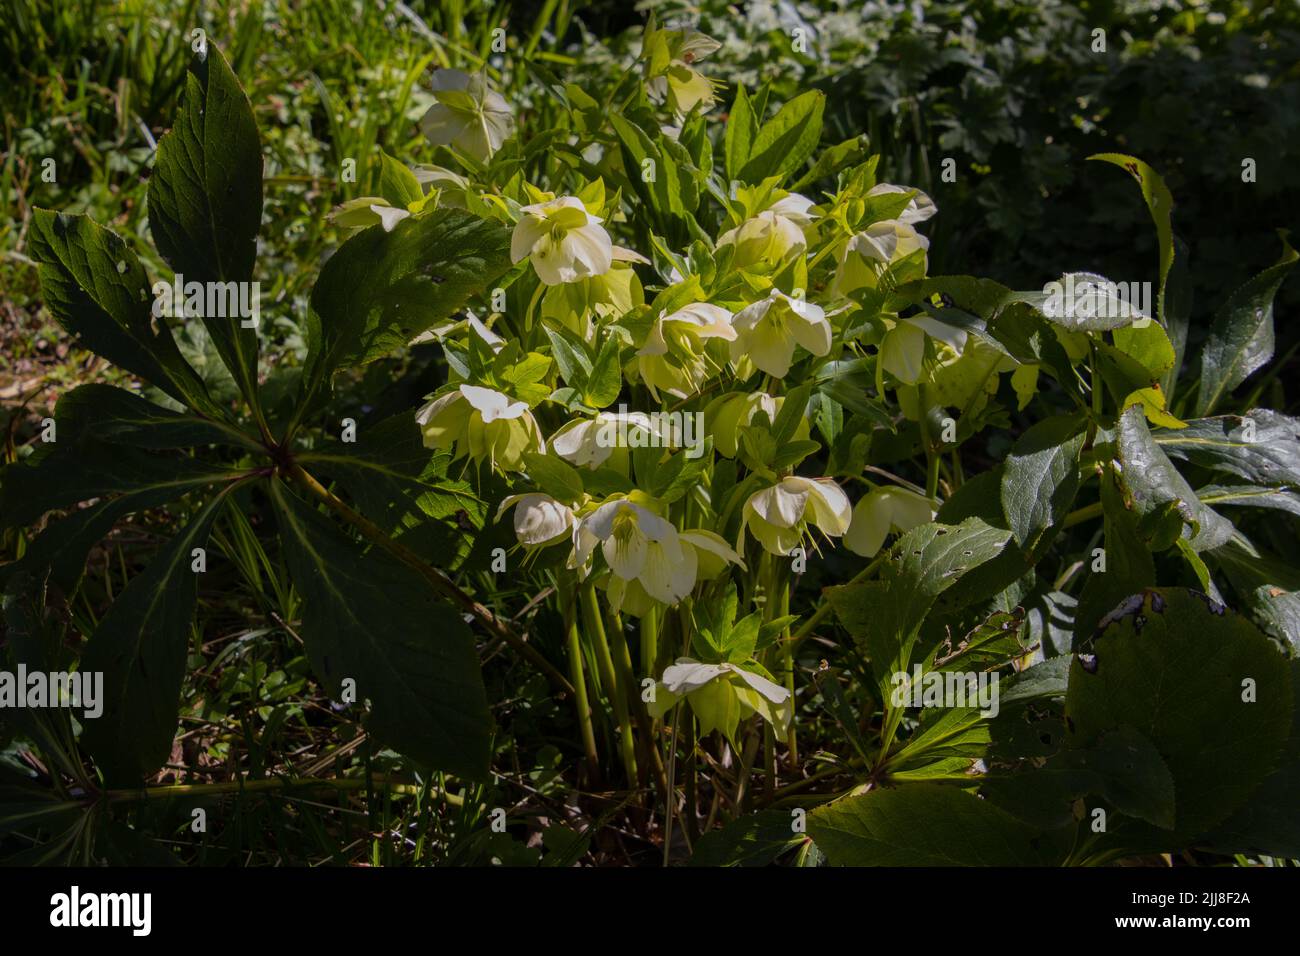 Bunch of white blooming flowers of the helleborus niger, also called lenten rose or Nieswurz Stock Photo